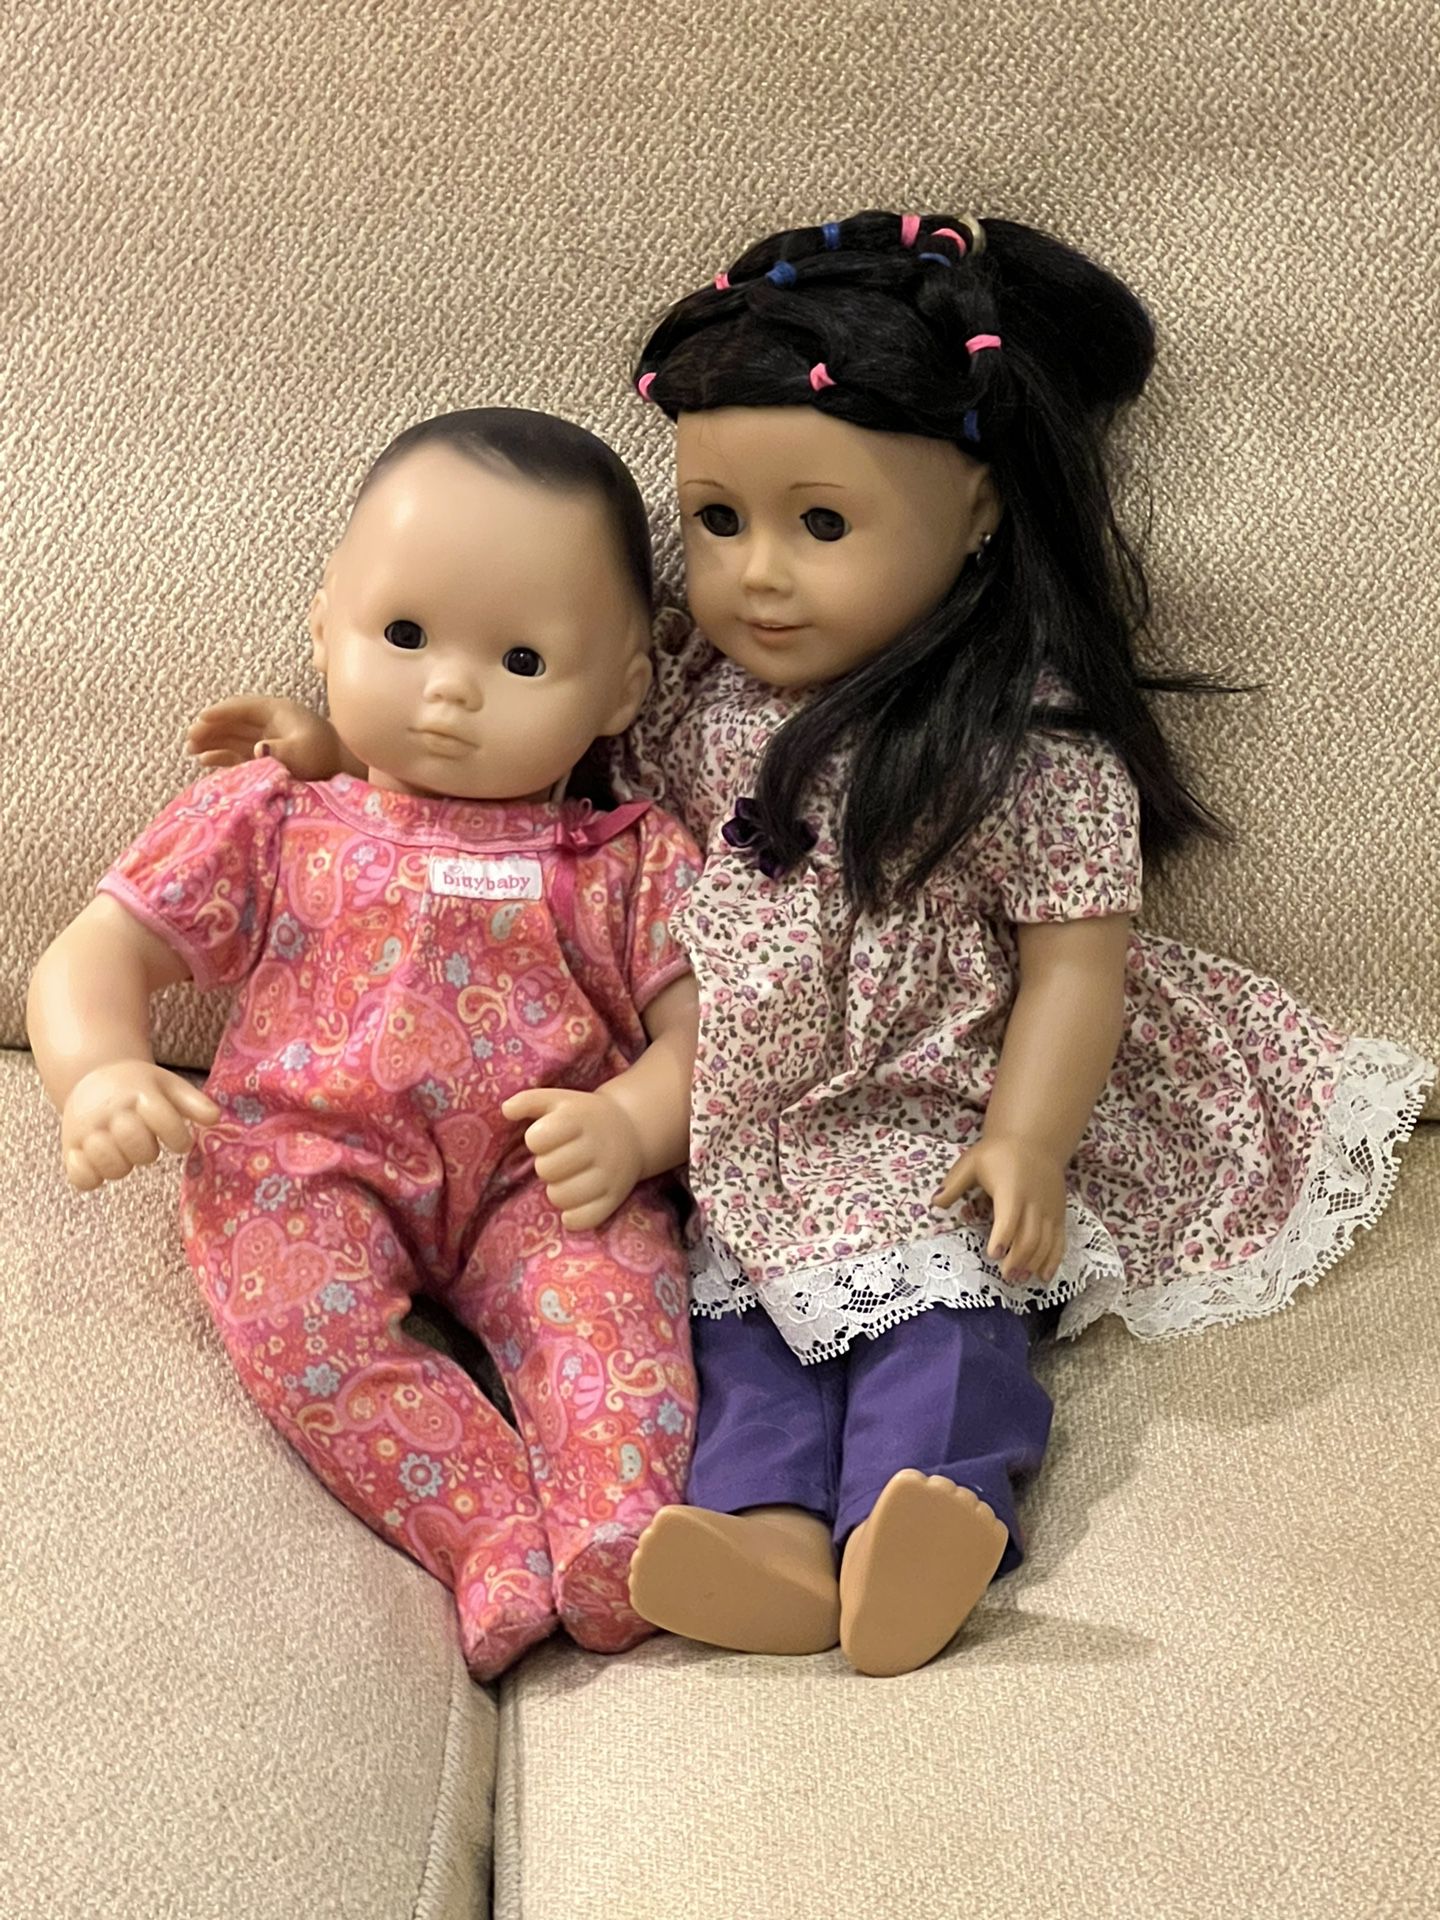 2 Authentic American Girl Dolls From NYC With Over 150+ Clothing And Accessory Pieces!